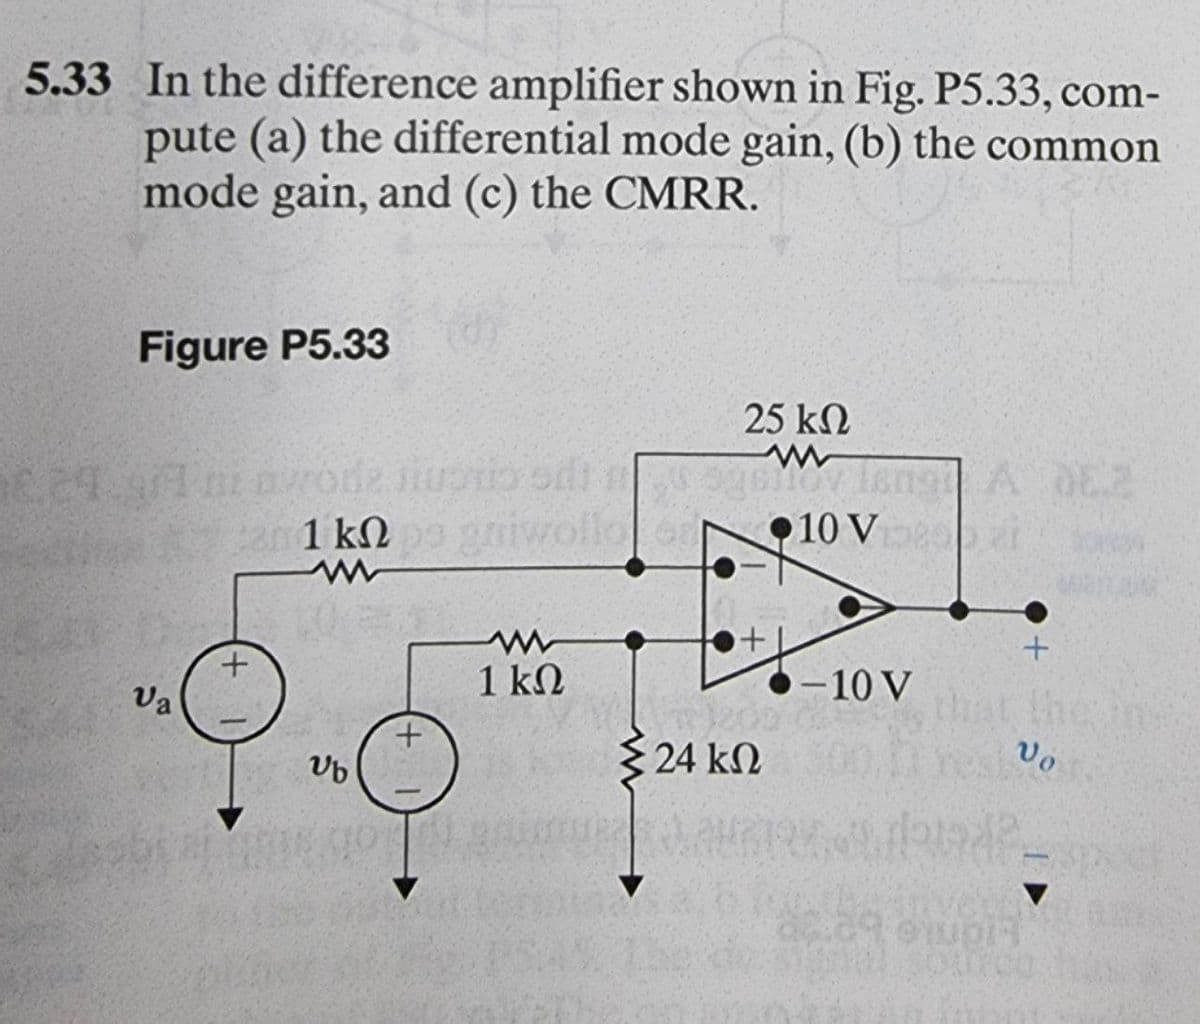 5.33 In the difference amplifier shown in Fig. P5.33, com-
pute (a) the differential mode gain, (b) the common
mode gain, and (c) the CMRR.
Figure P5.33
25 kN
A 0E2
Mov
•10 V zi
1 kN
1 kN
-10 V
Va
the
3 24 kN
Vo
